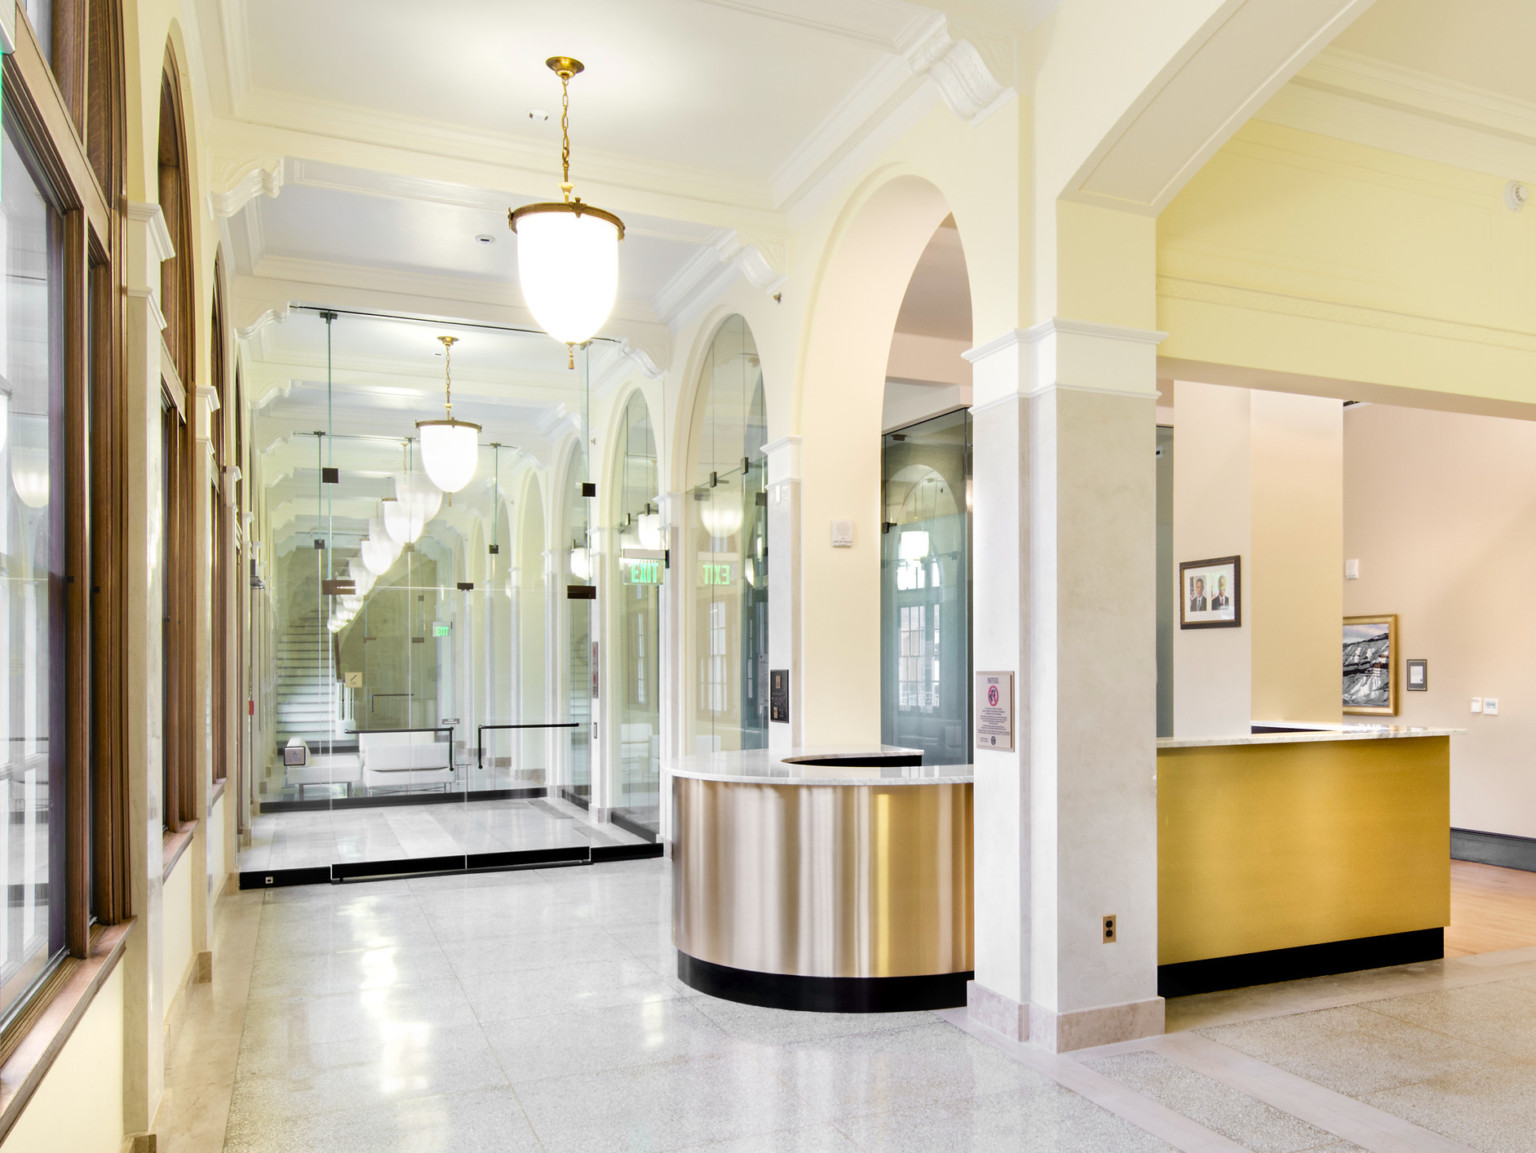 Gold reception desk with marble counter in front of a mirrored hallway with arched windows and hanging light